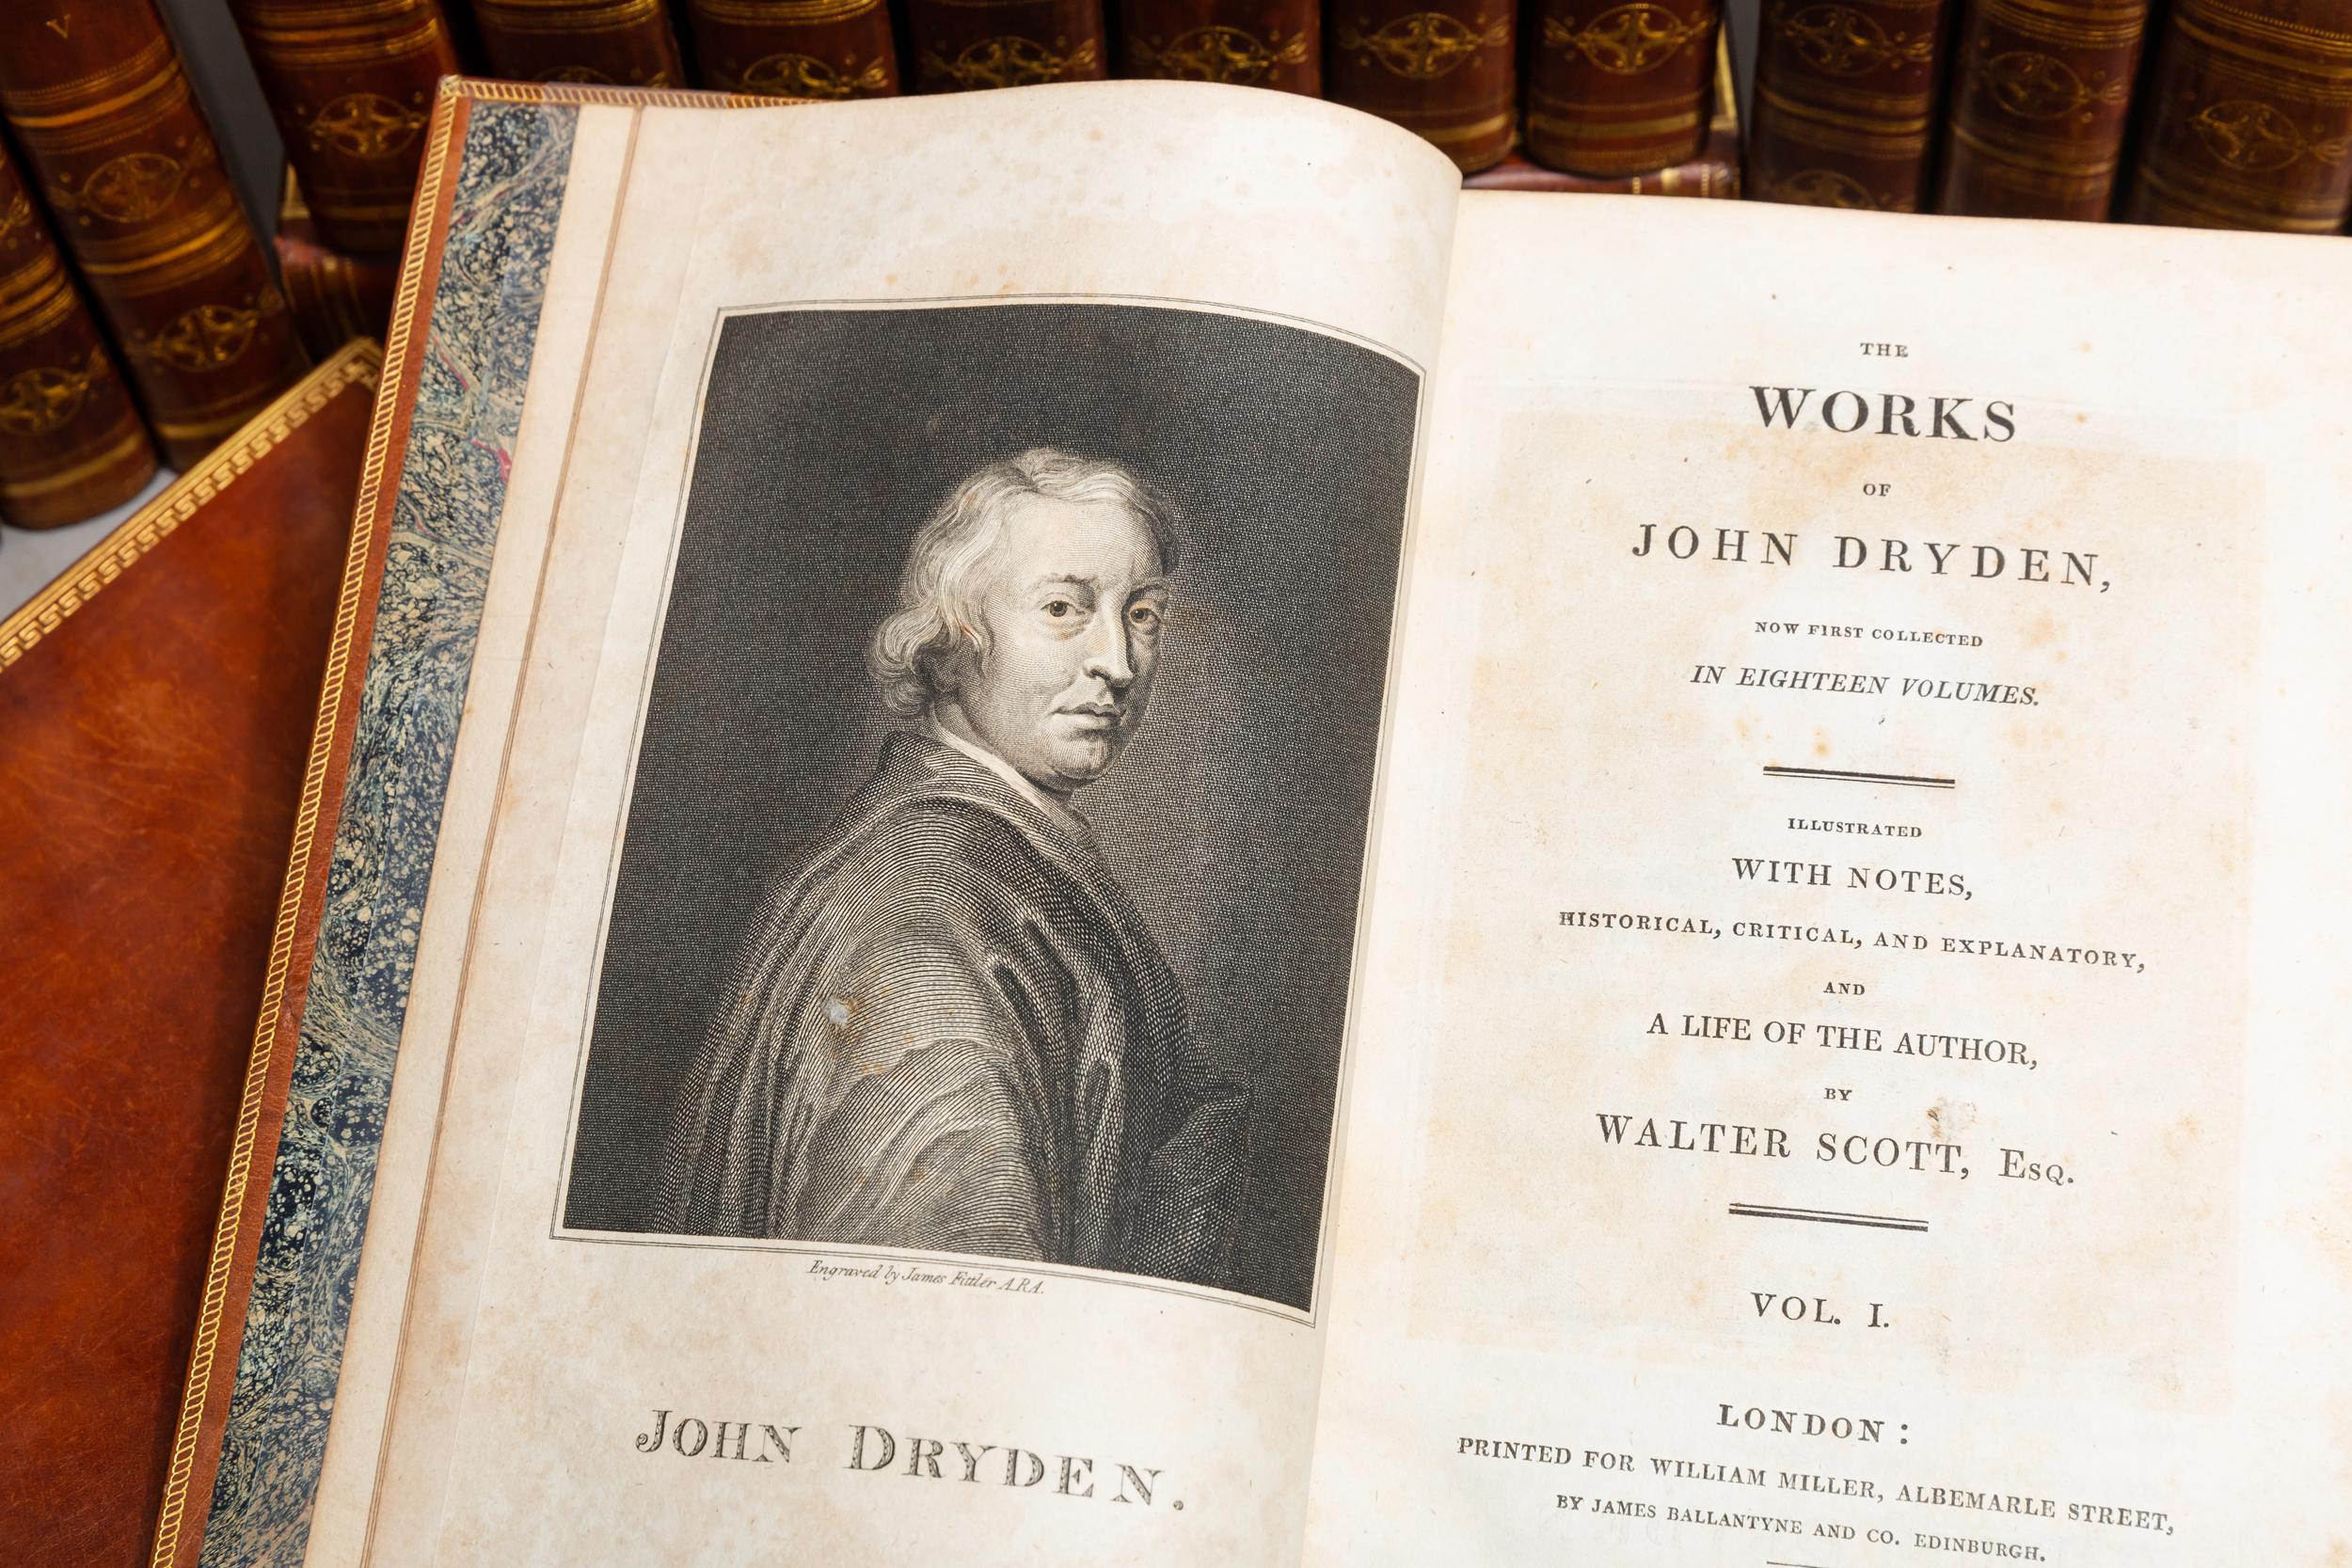 18 Volumes. John Dryden. The Works. Illustrated with Notes, Historical, Critical and Explanatory, and A Life of The Author by Walter Scott. Bound in full tan calf. All edges gilt, gilt on covers & spines, marbled endpapers. Handsome set.
Published: